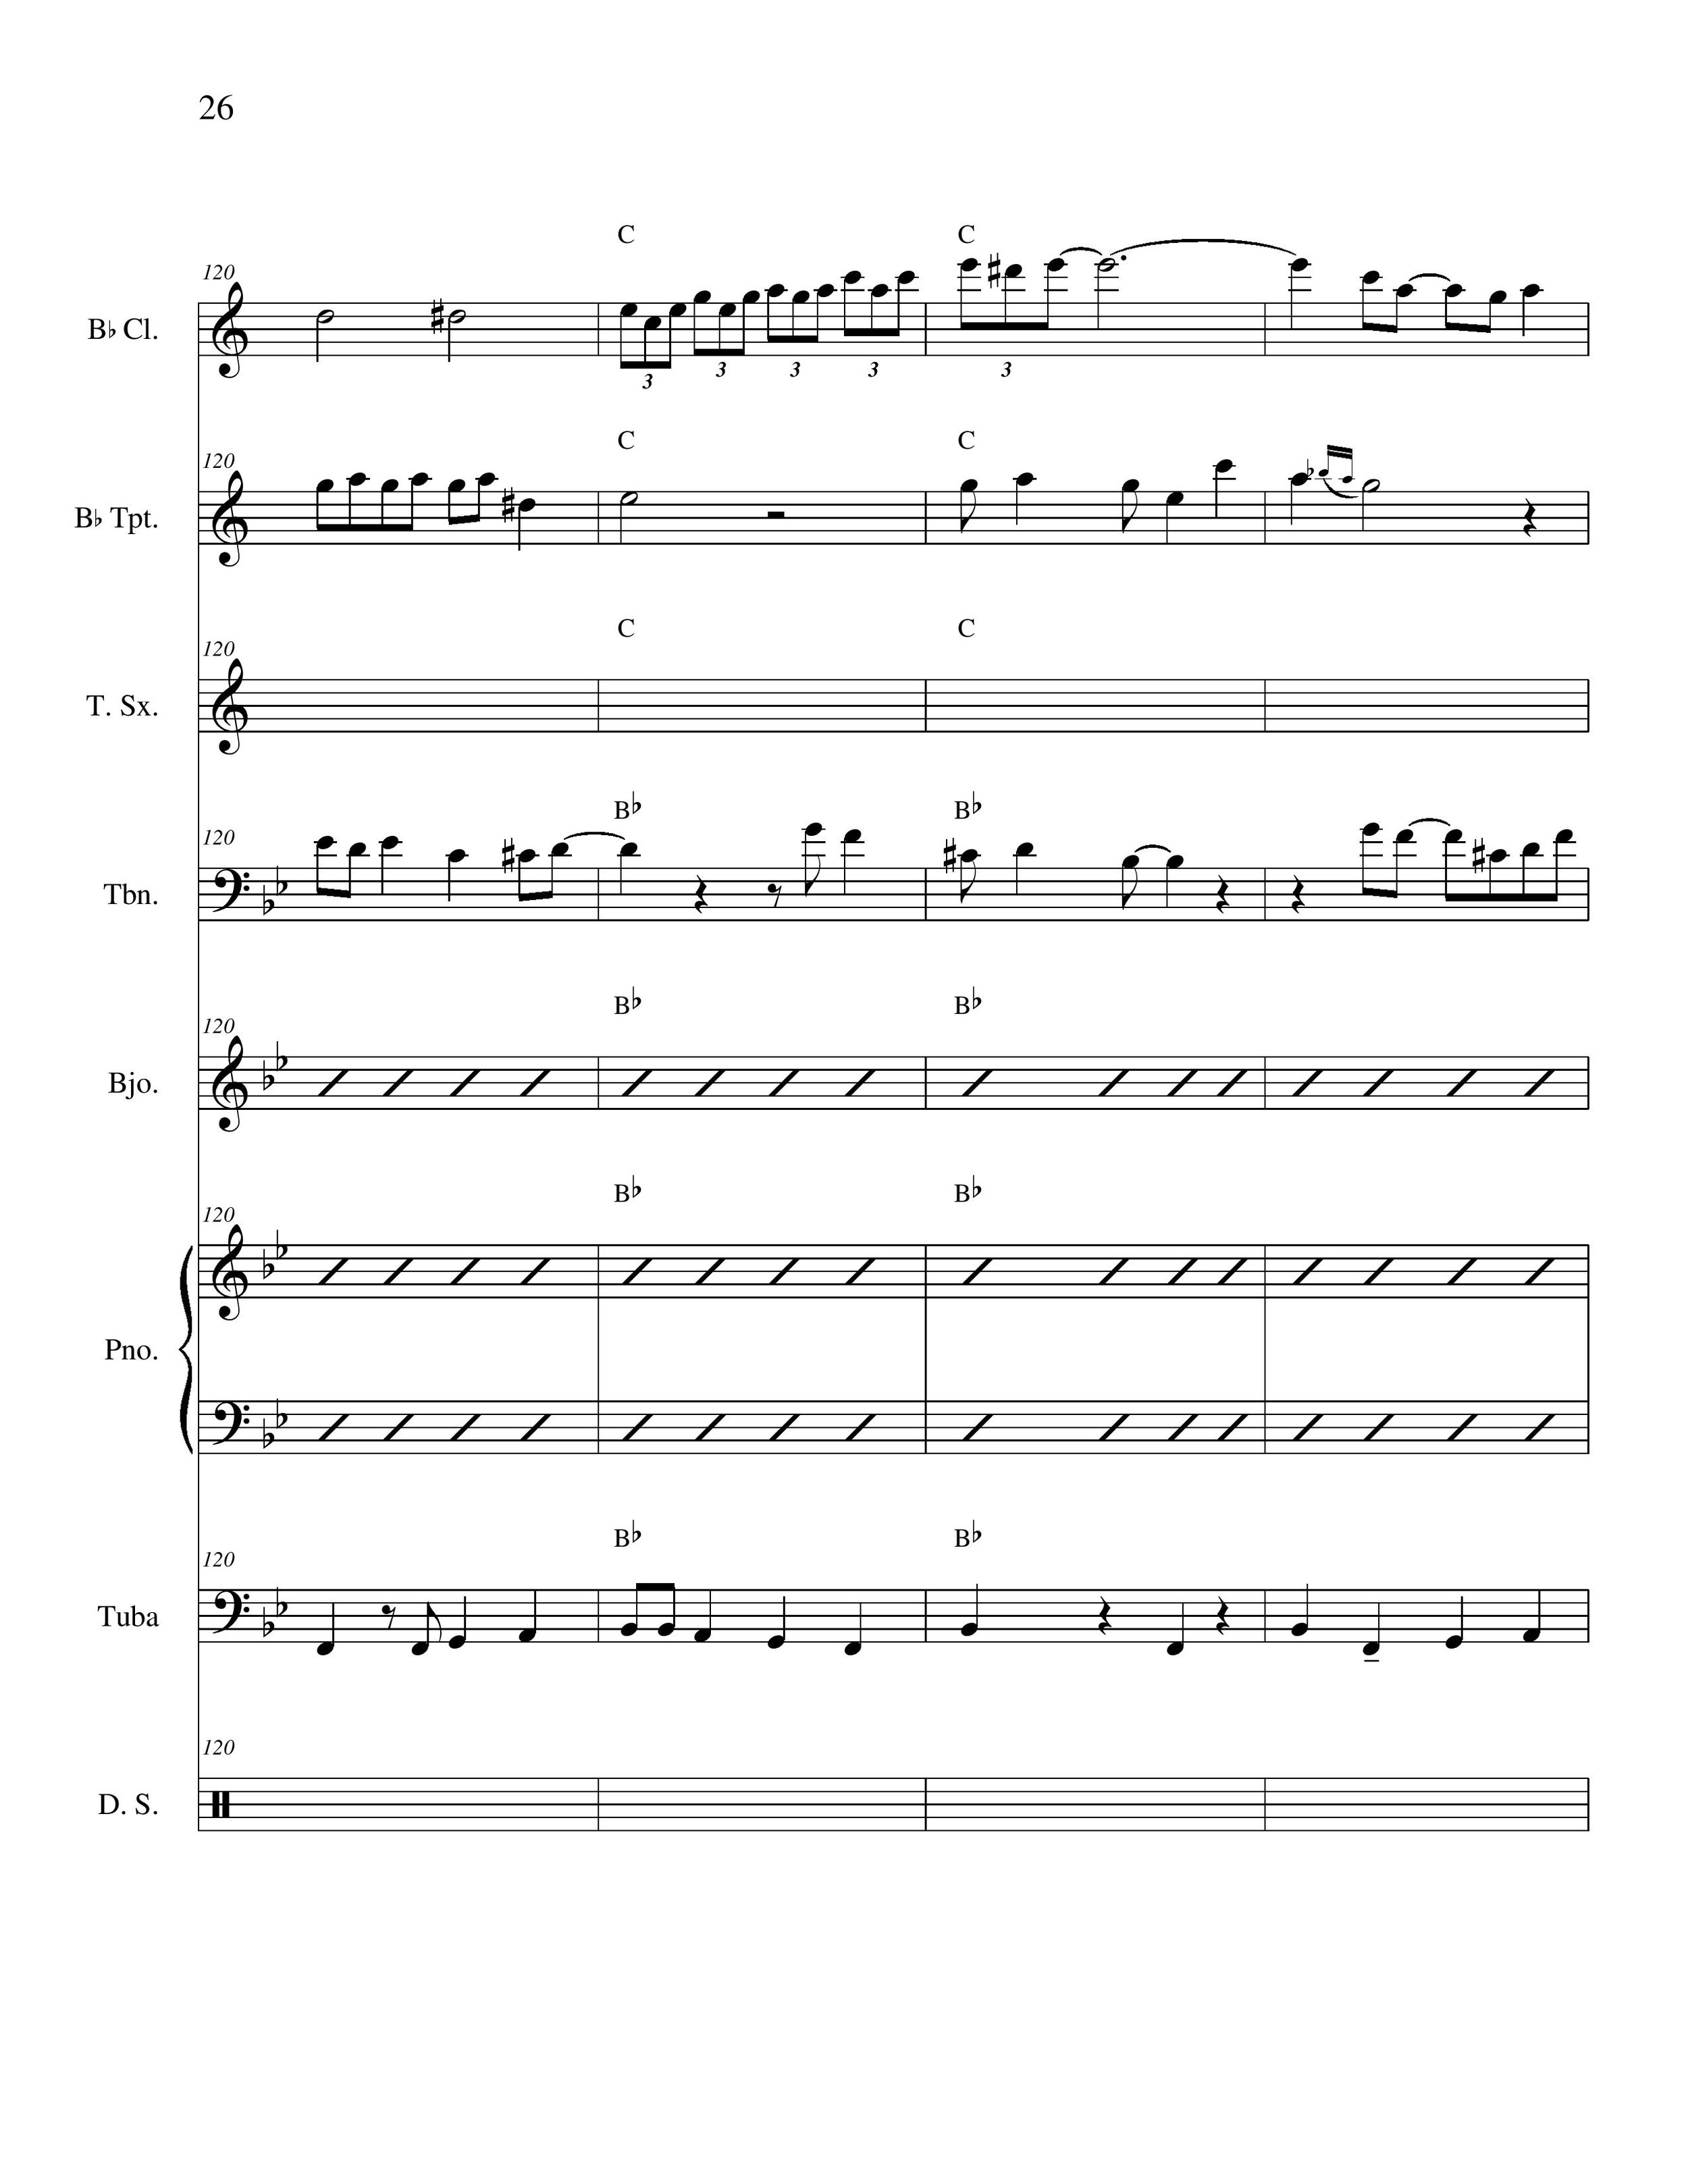 Rudolph the Red-Nosed Reindeer - Score_26.jpg